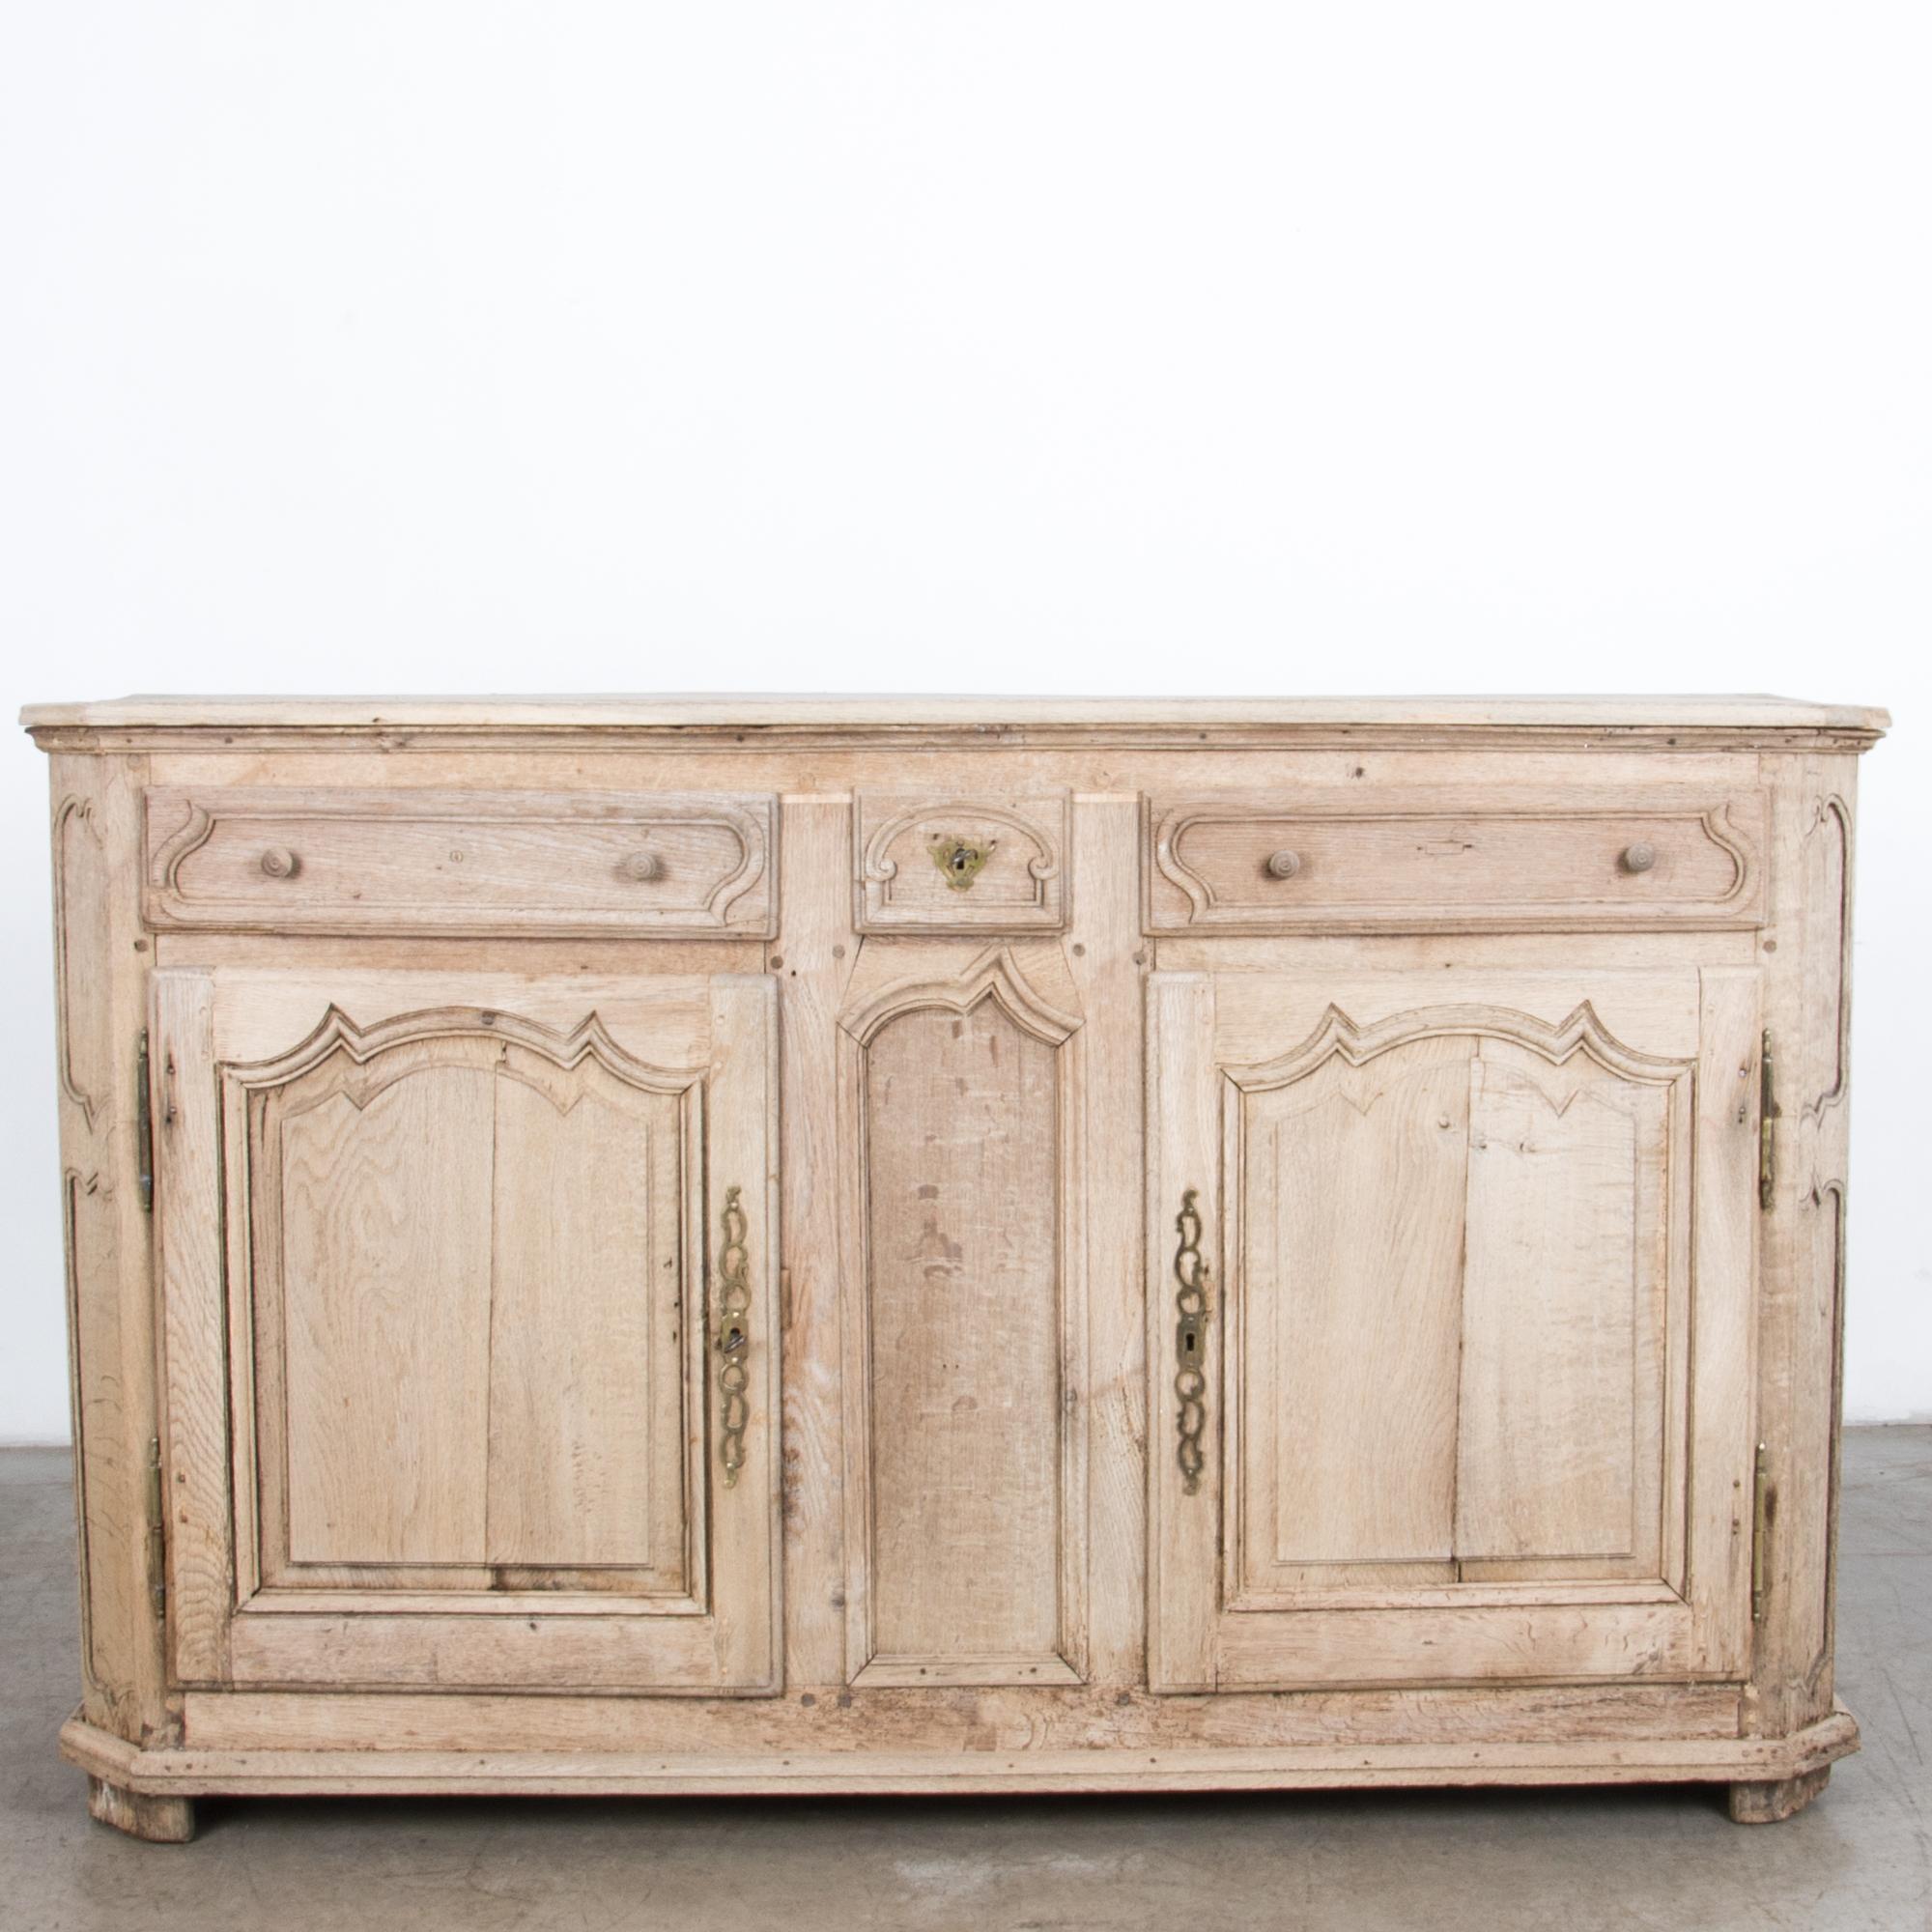 A descendent of the storied lineage of traditional furniture construction, a two-door buffet with three drawers. In a stylish light finish, sturdy oak has been cleaned and polished with an oil / wax finish, enhancing the natural texture and original